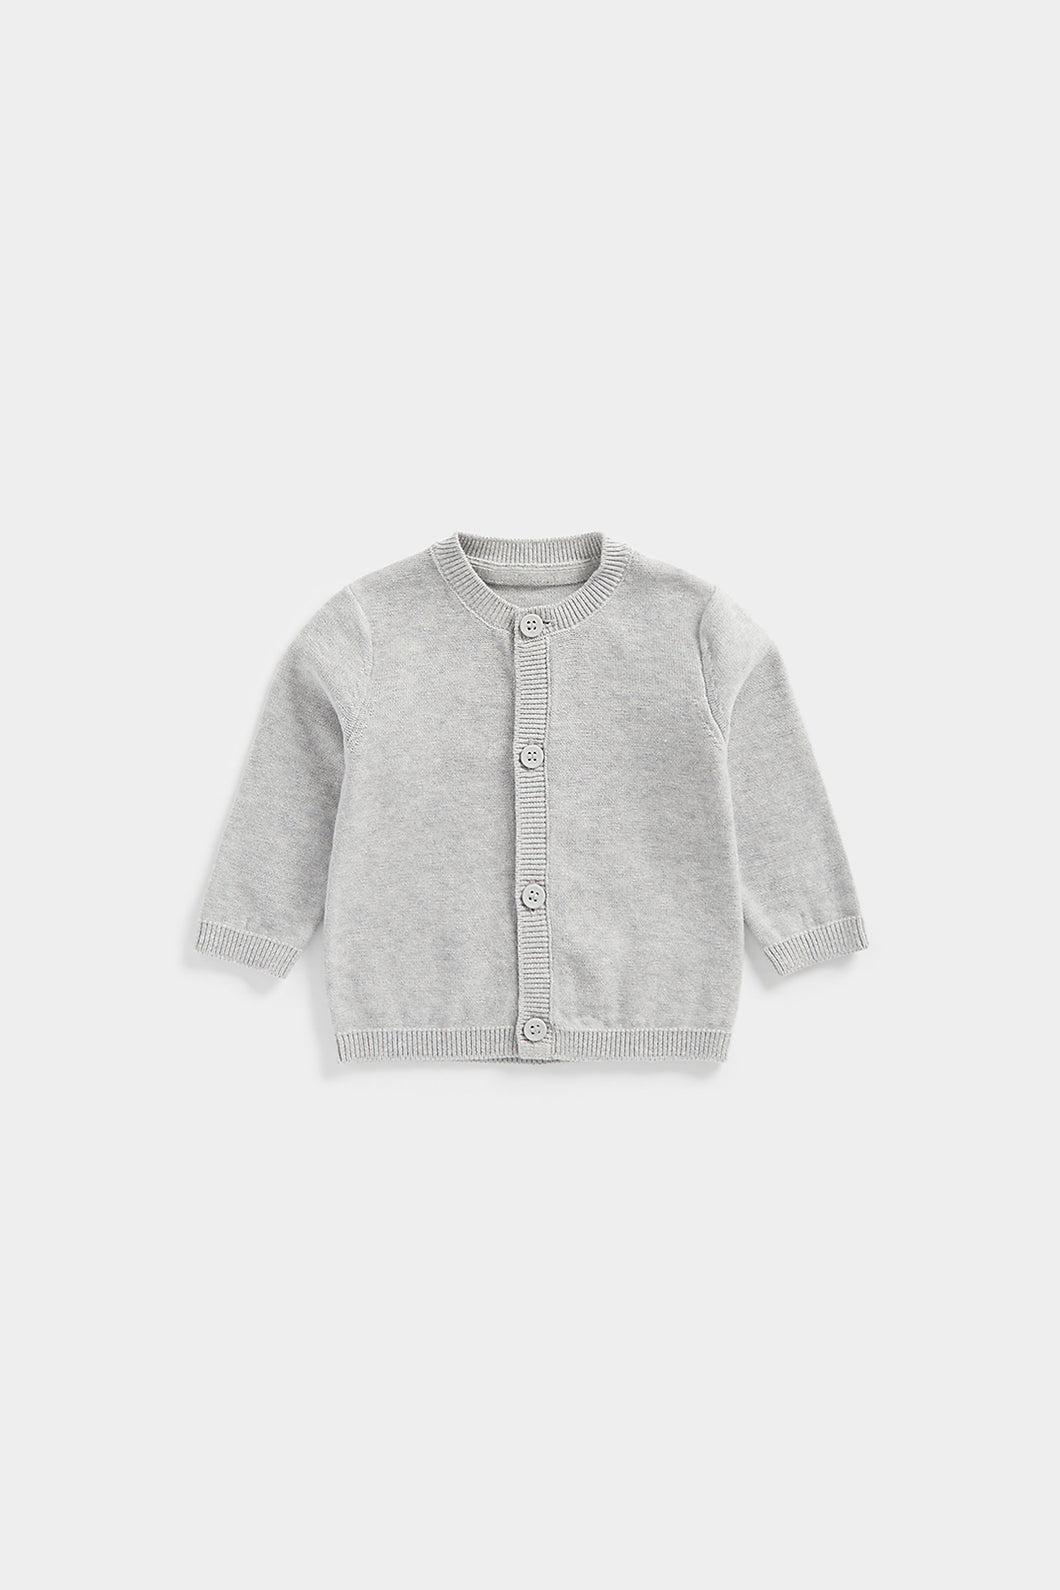 Mothercare My First Grey Knitted Cardigan